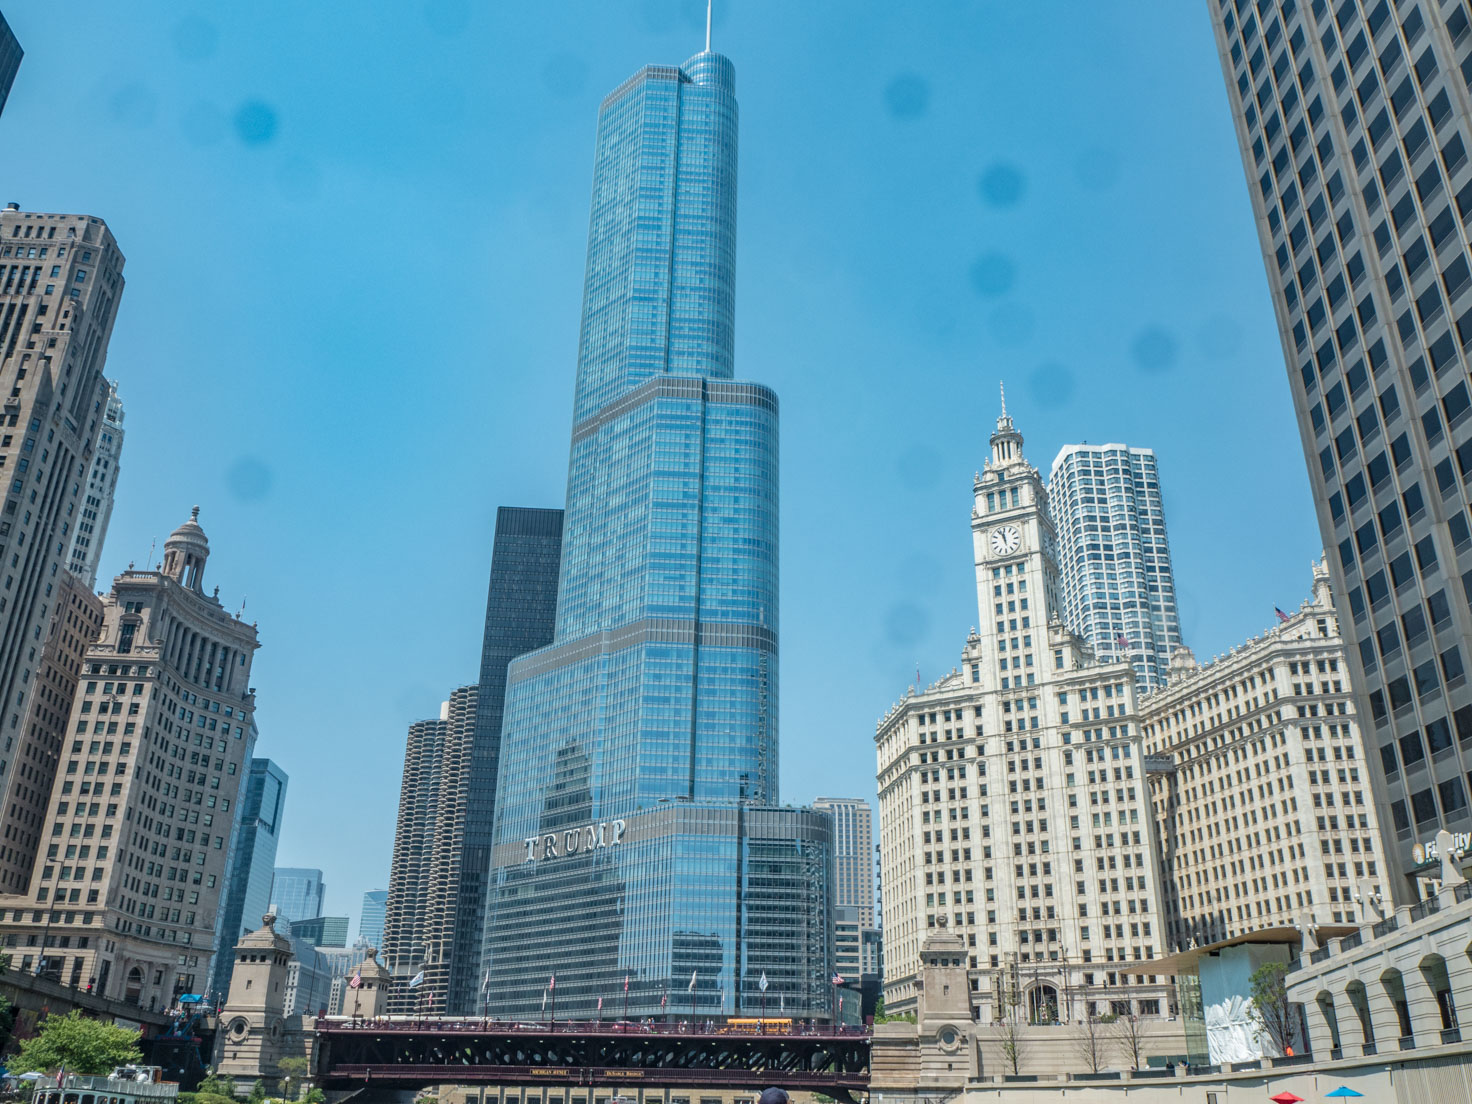 Architecture river tour and 3 must see things in Chicago by Chic Journal blog 